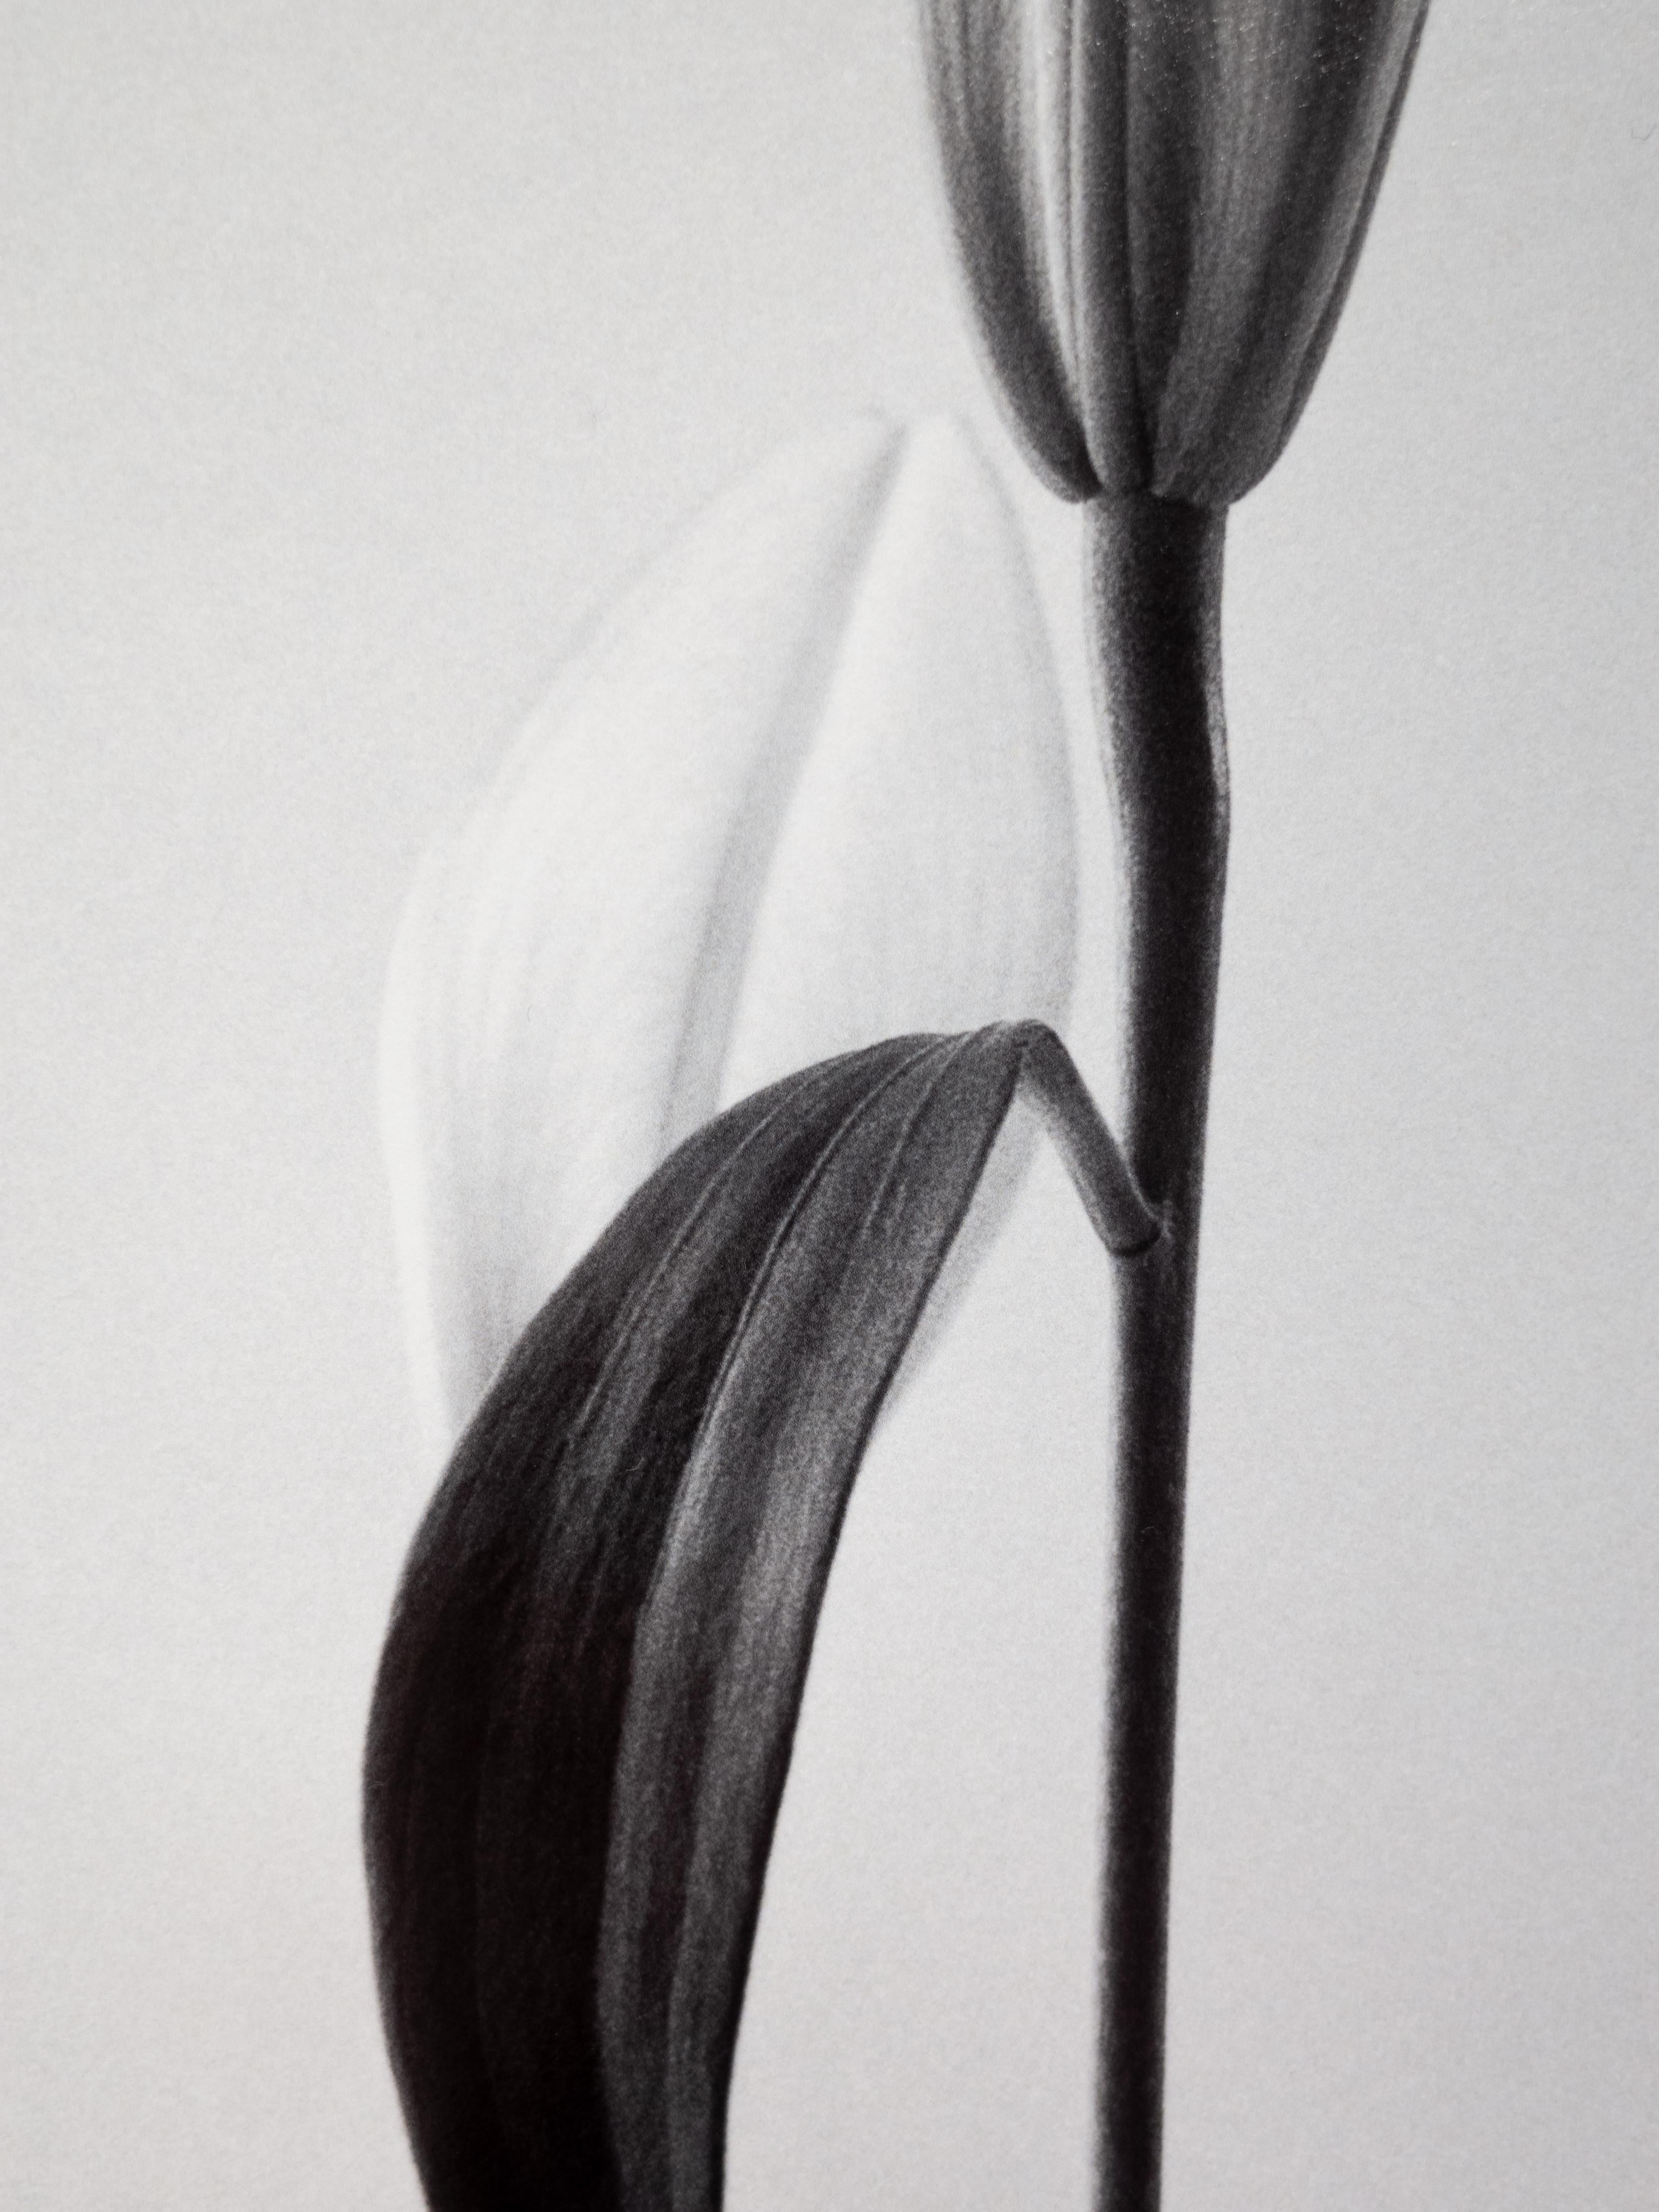 Lily - analogue black and white floral photography - Contemporary Photograph by Ugne Pouwell